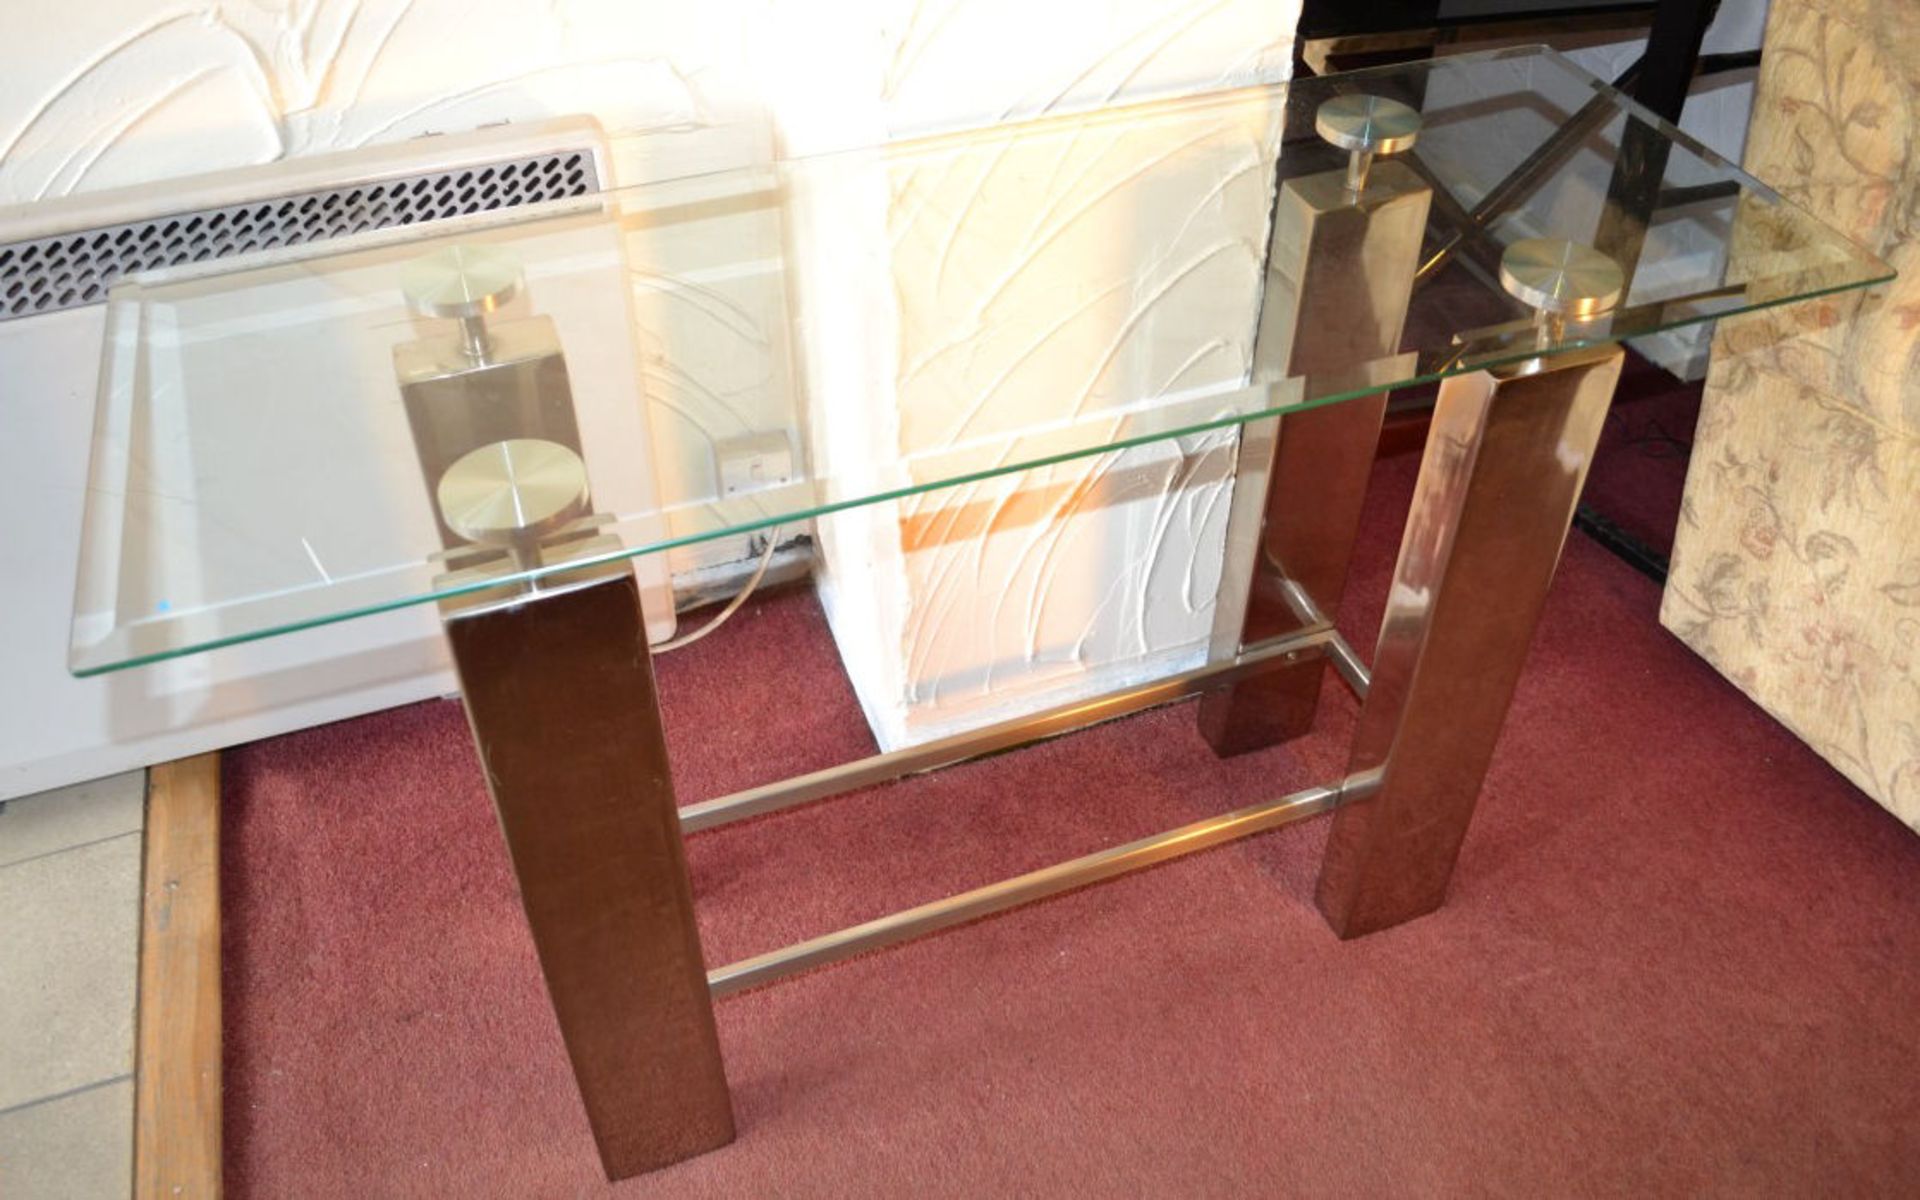 1 x Contemporary Glass Top Console Table With Silver Metal Legs - CL108 - Image 4 of 5